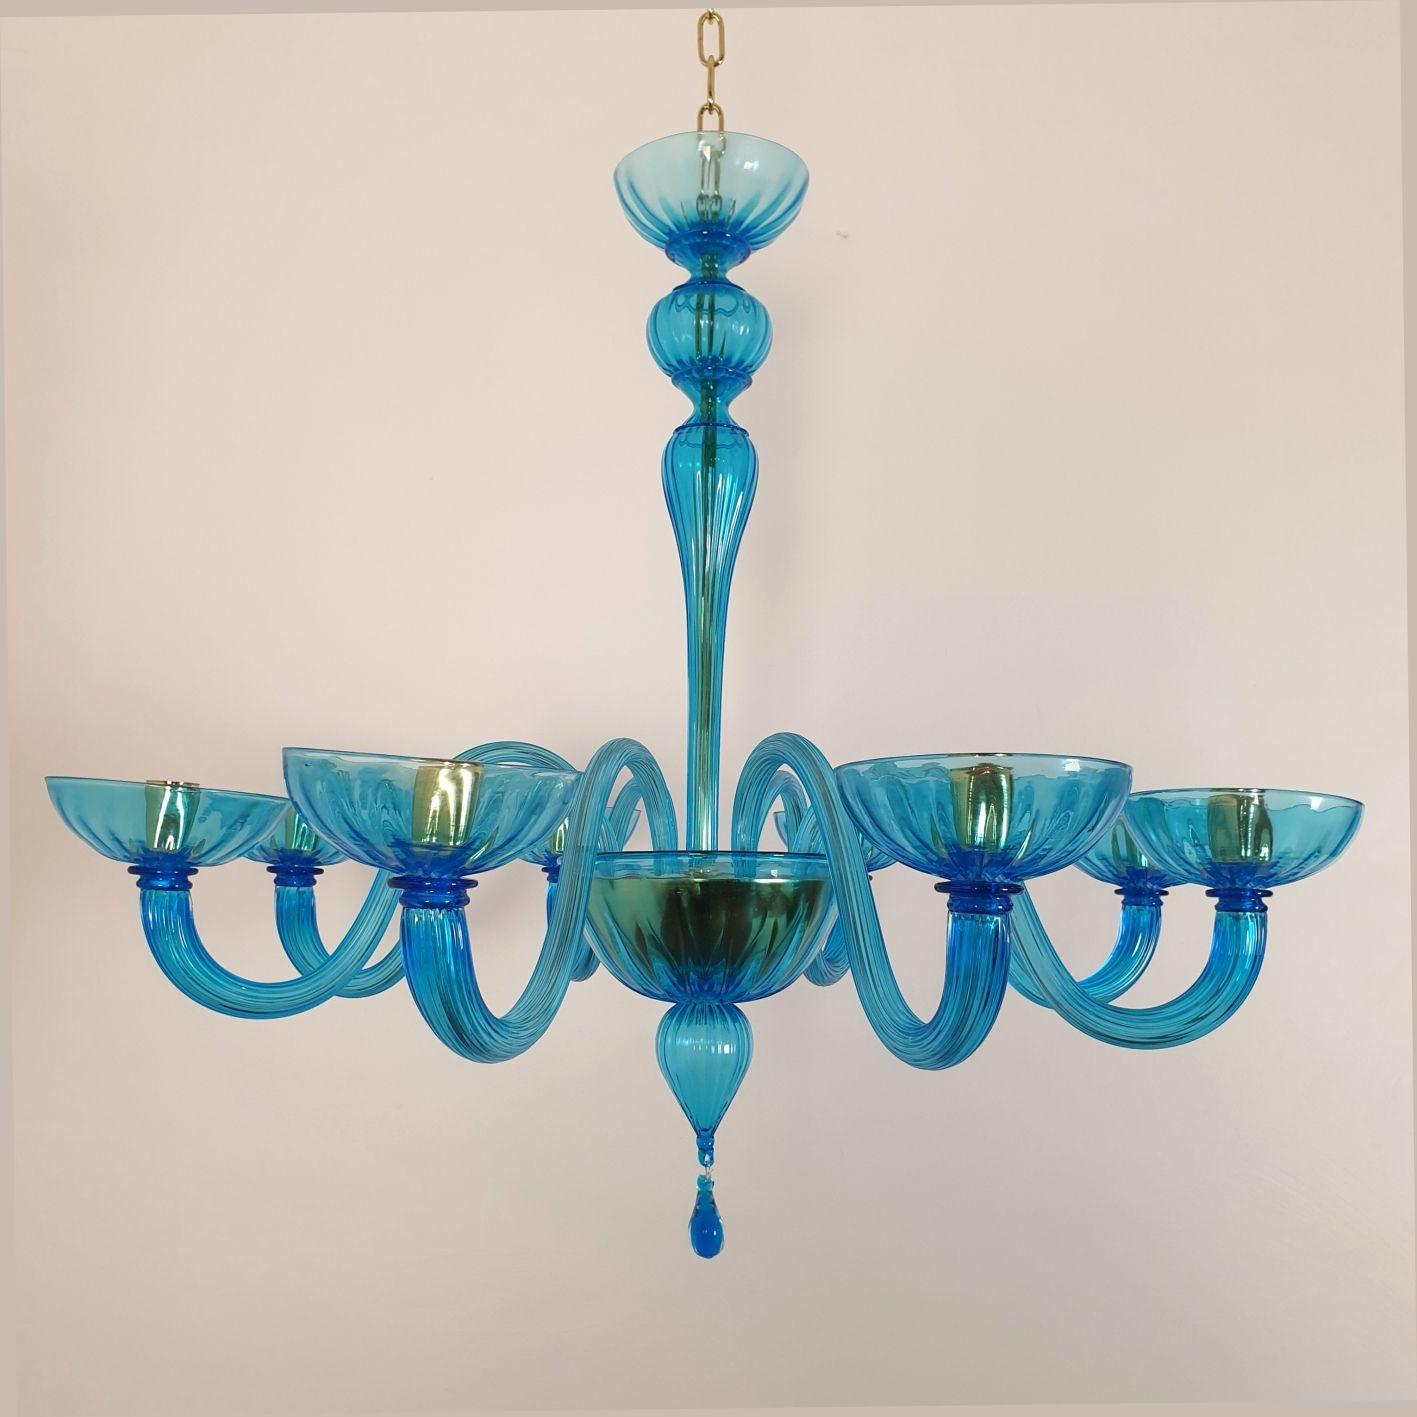 Large Mid Century Modern sky blue Murano glass chandelier, attributed to Venini, Italy 1970s.
The neoclassical style chandelier has 8 lights or arms.
It's rewired for the US with Candelabra base sockets, or E12 (or for European standards upon